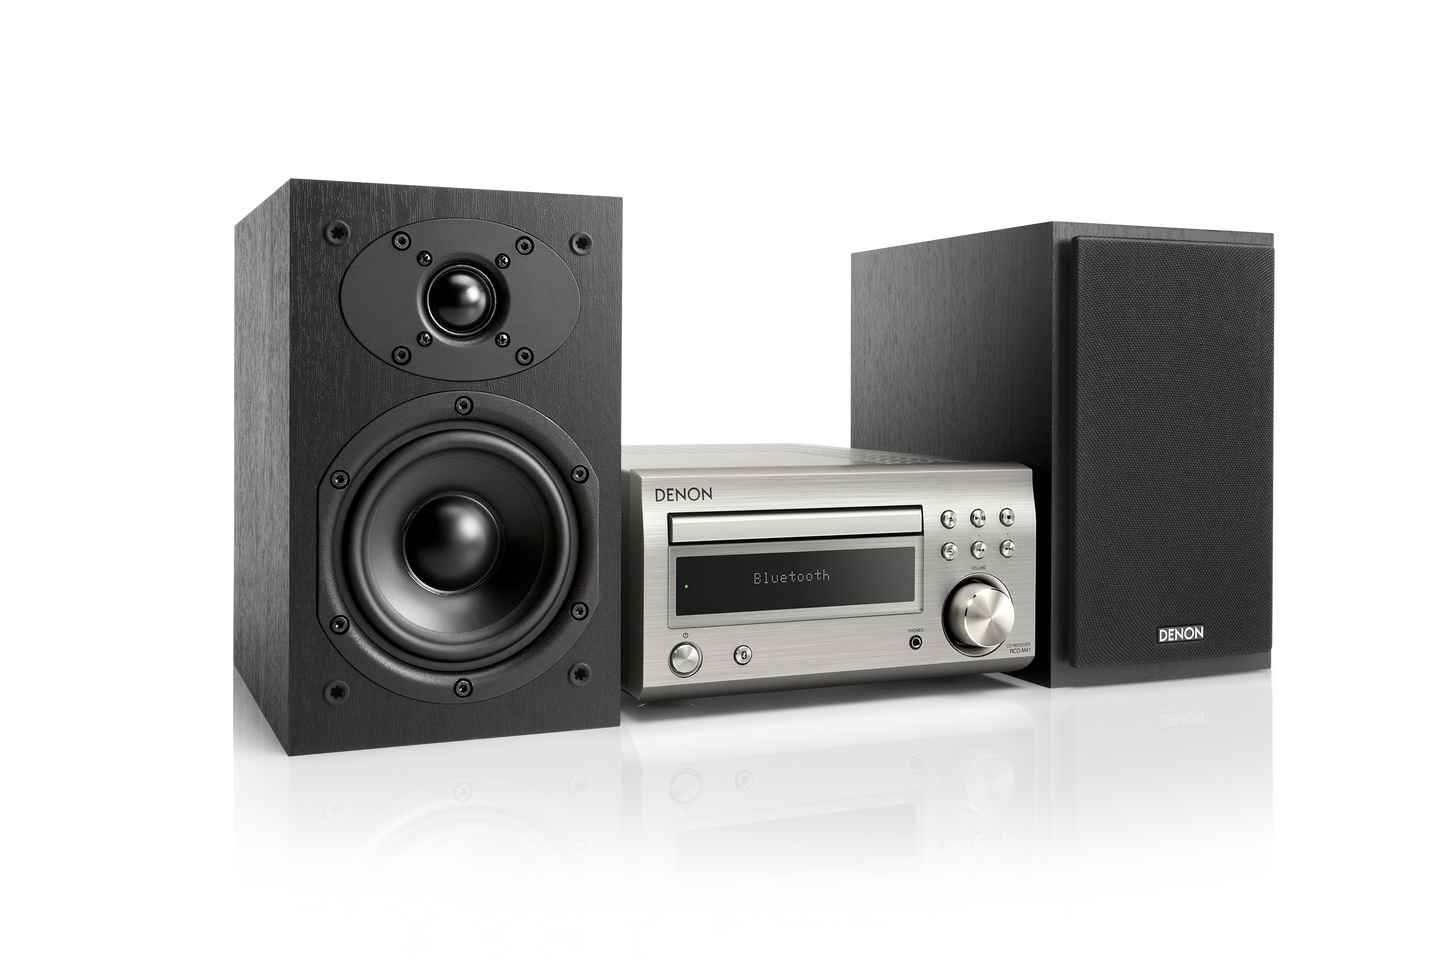 Denon D-M41 HiFi System with CD, Bluetooth and FM/AM Tuner